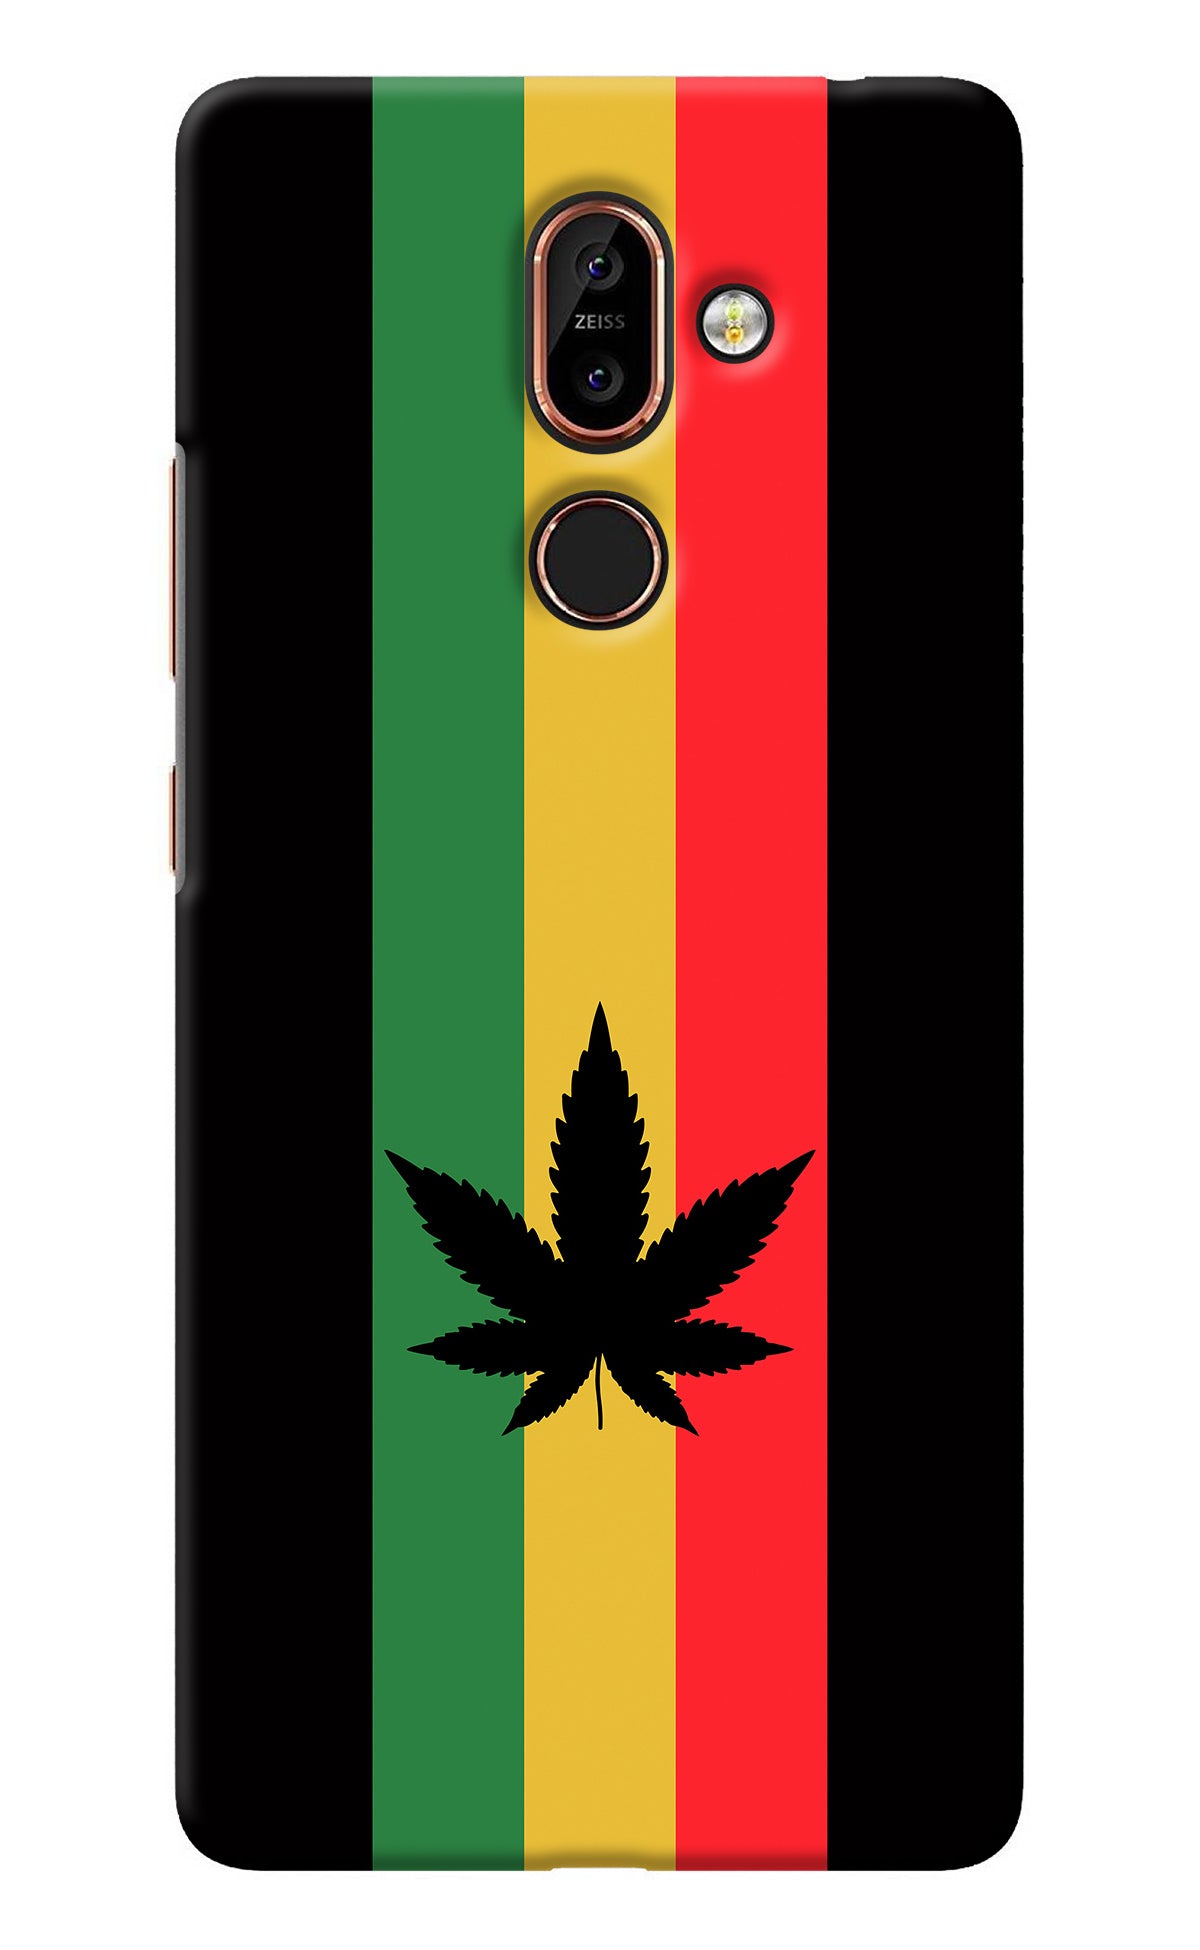 Weed Flag Nokia 7 Plus Back Cover